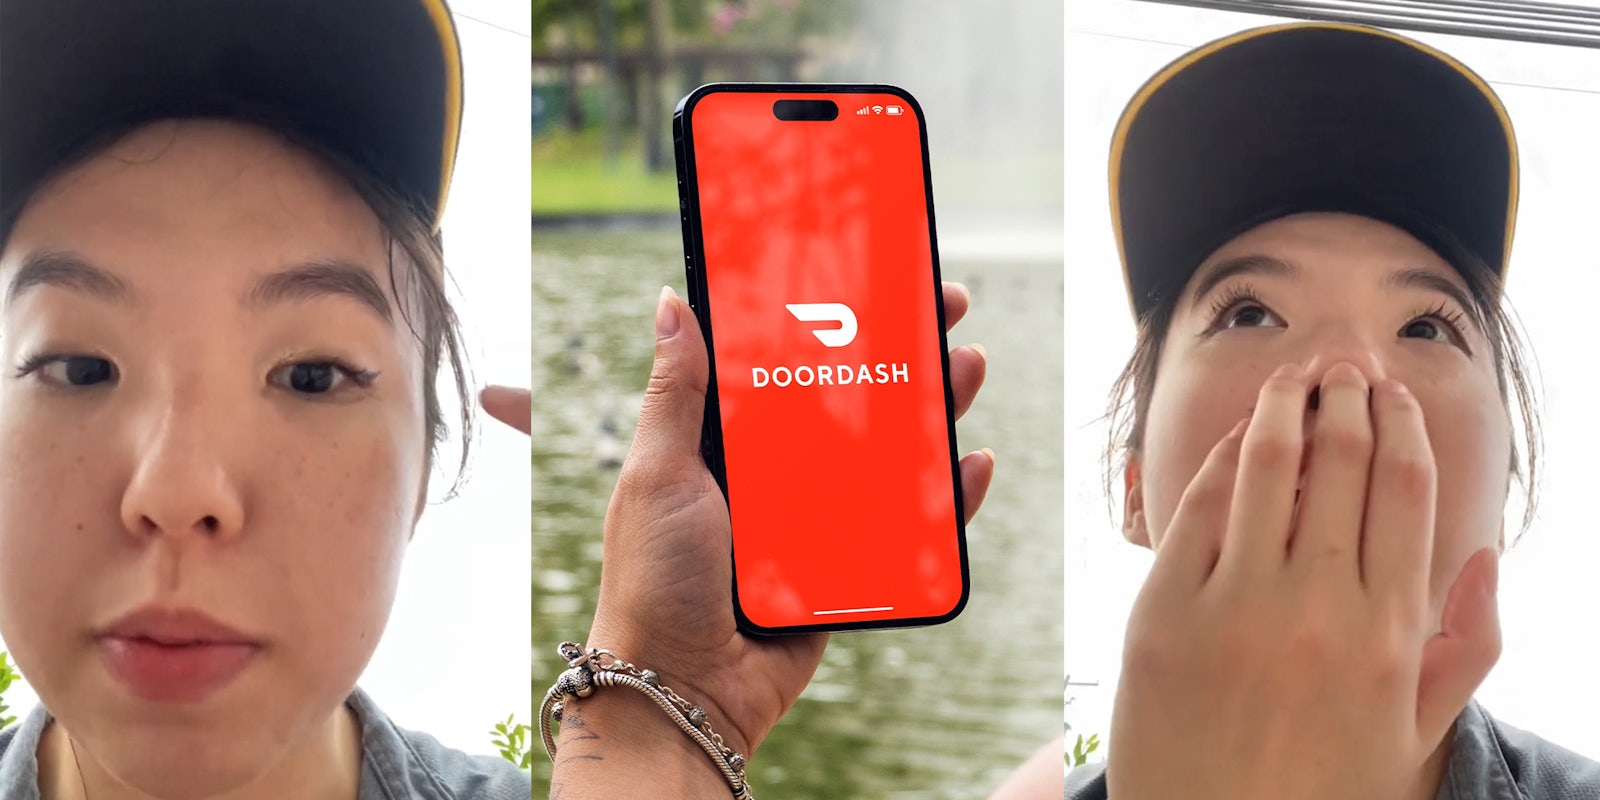 McDonald's worker calls out DoorDash driver who waited 45 minutes for order instead of cancelling it